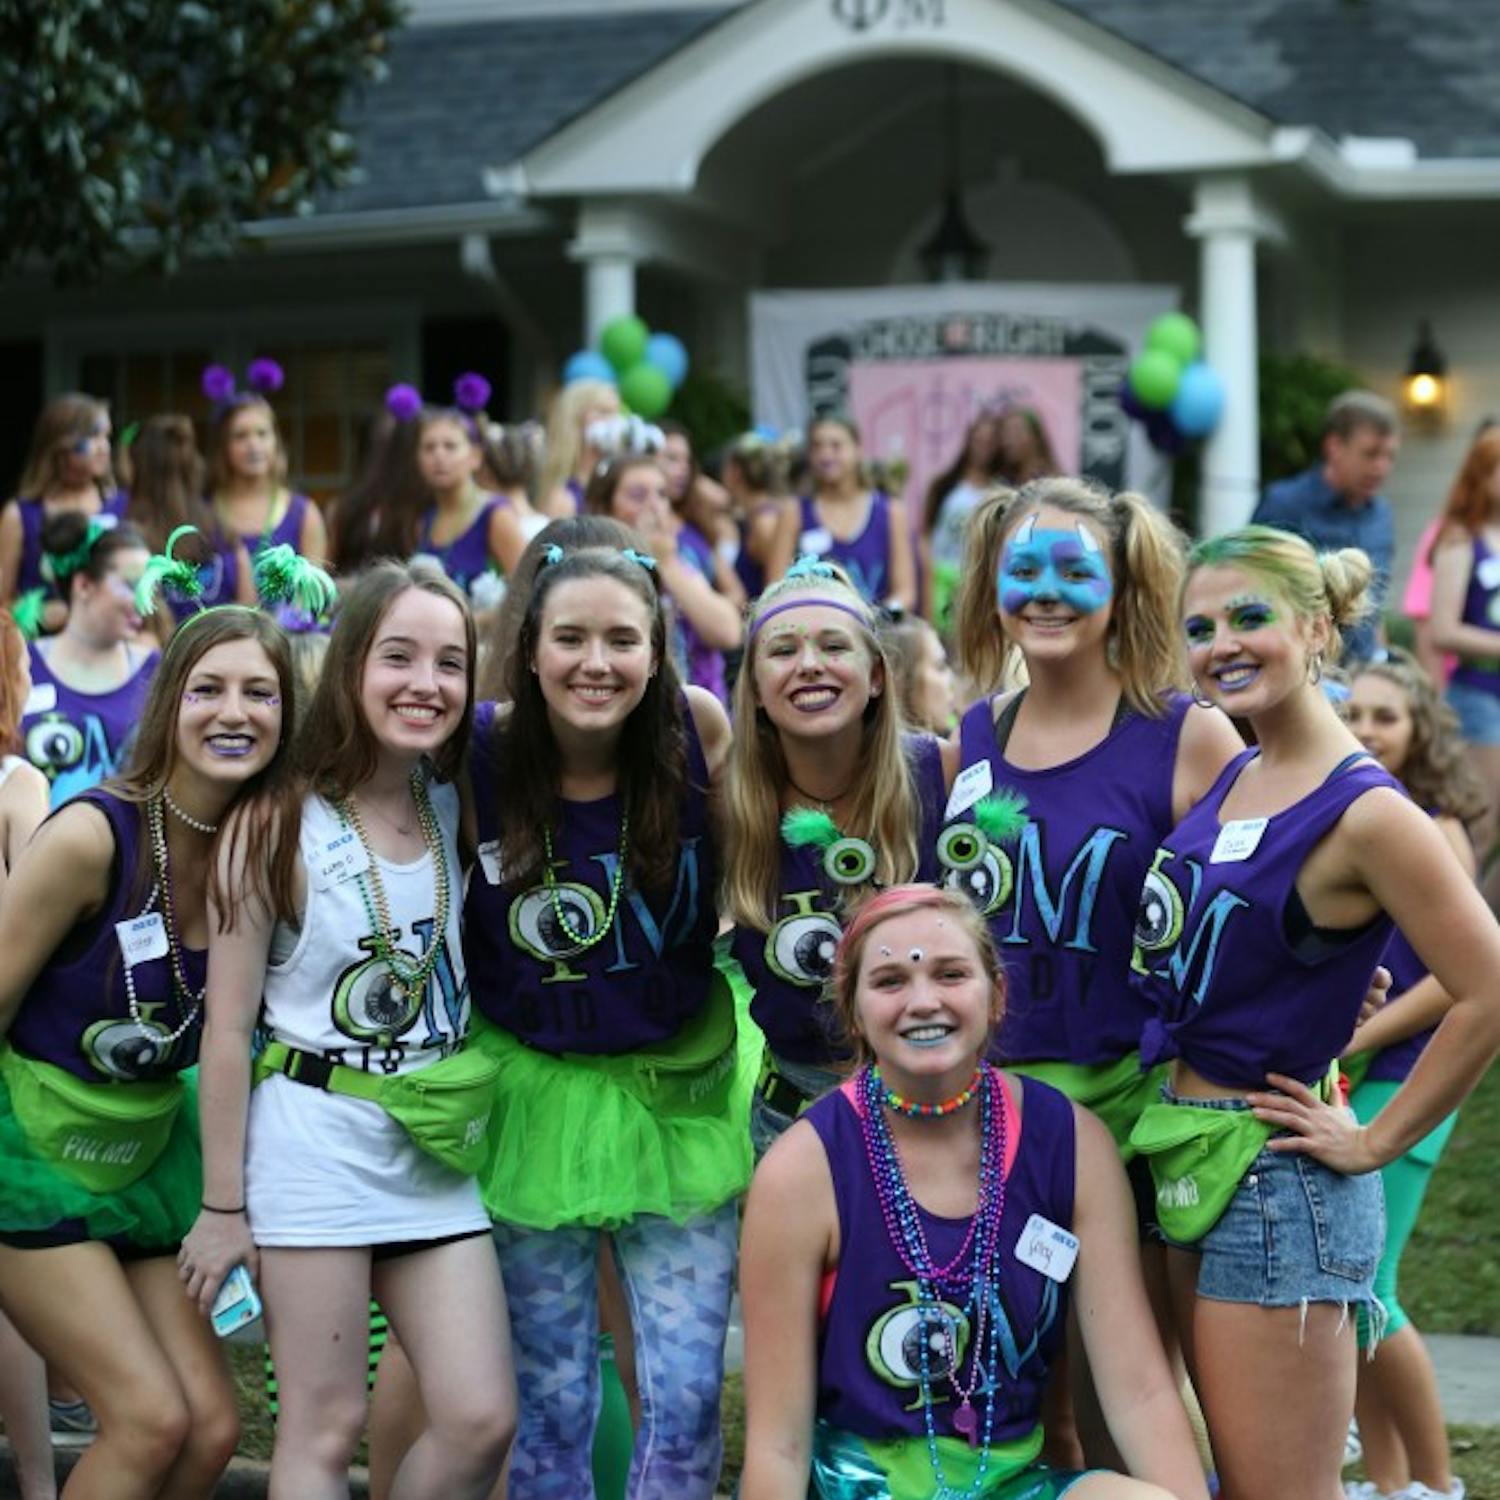 Members of Phi Mu stand in front of their sorority house.